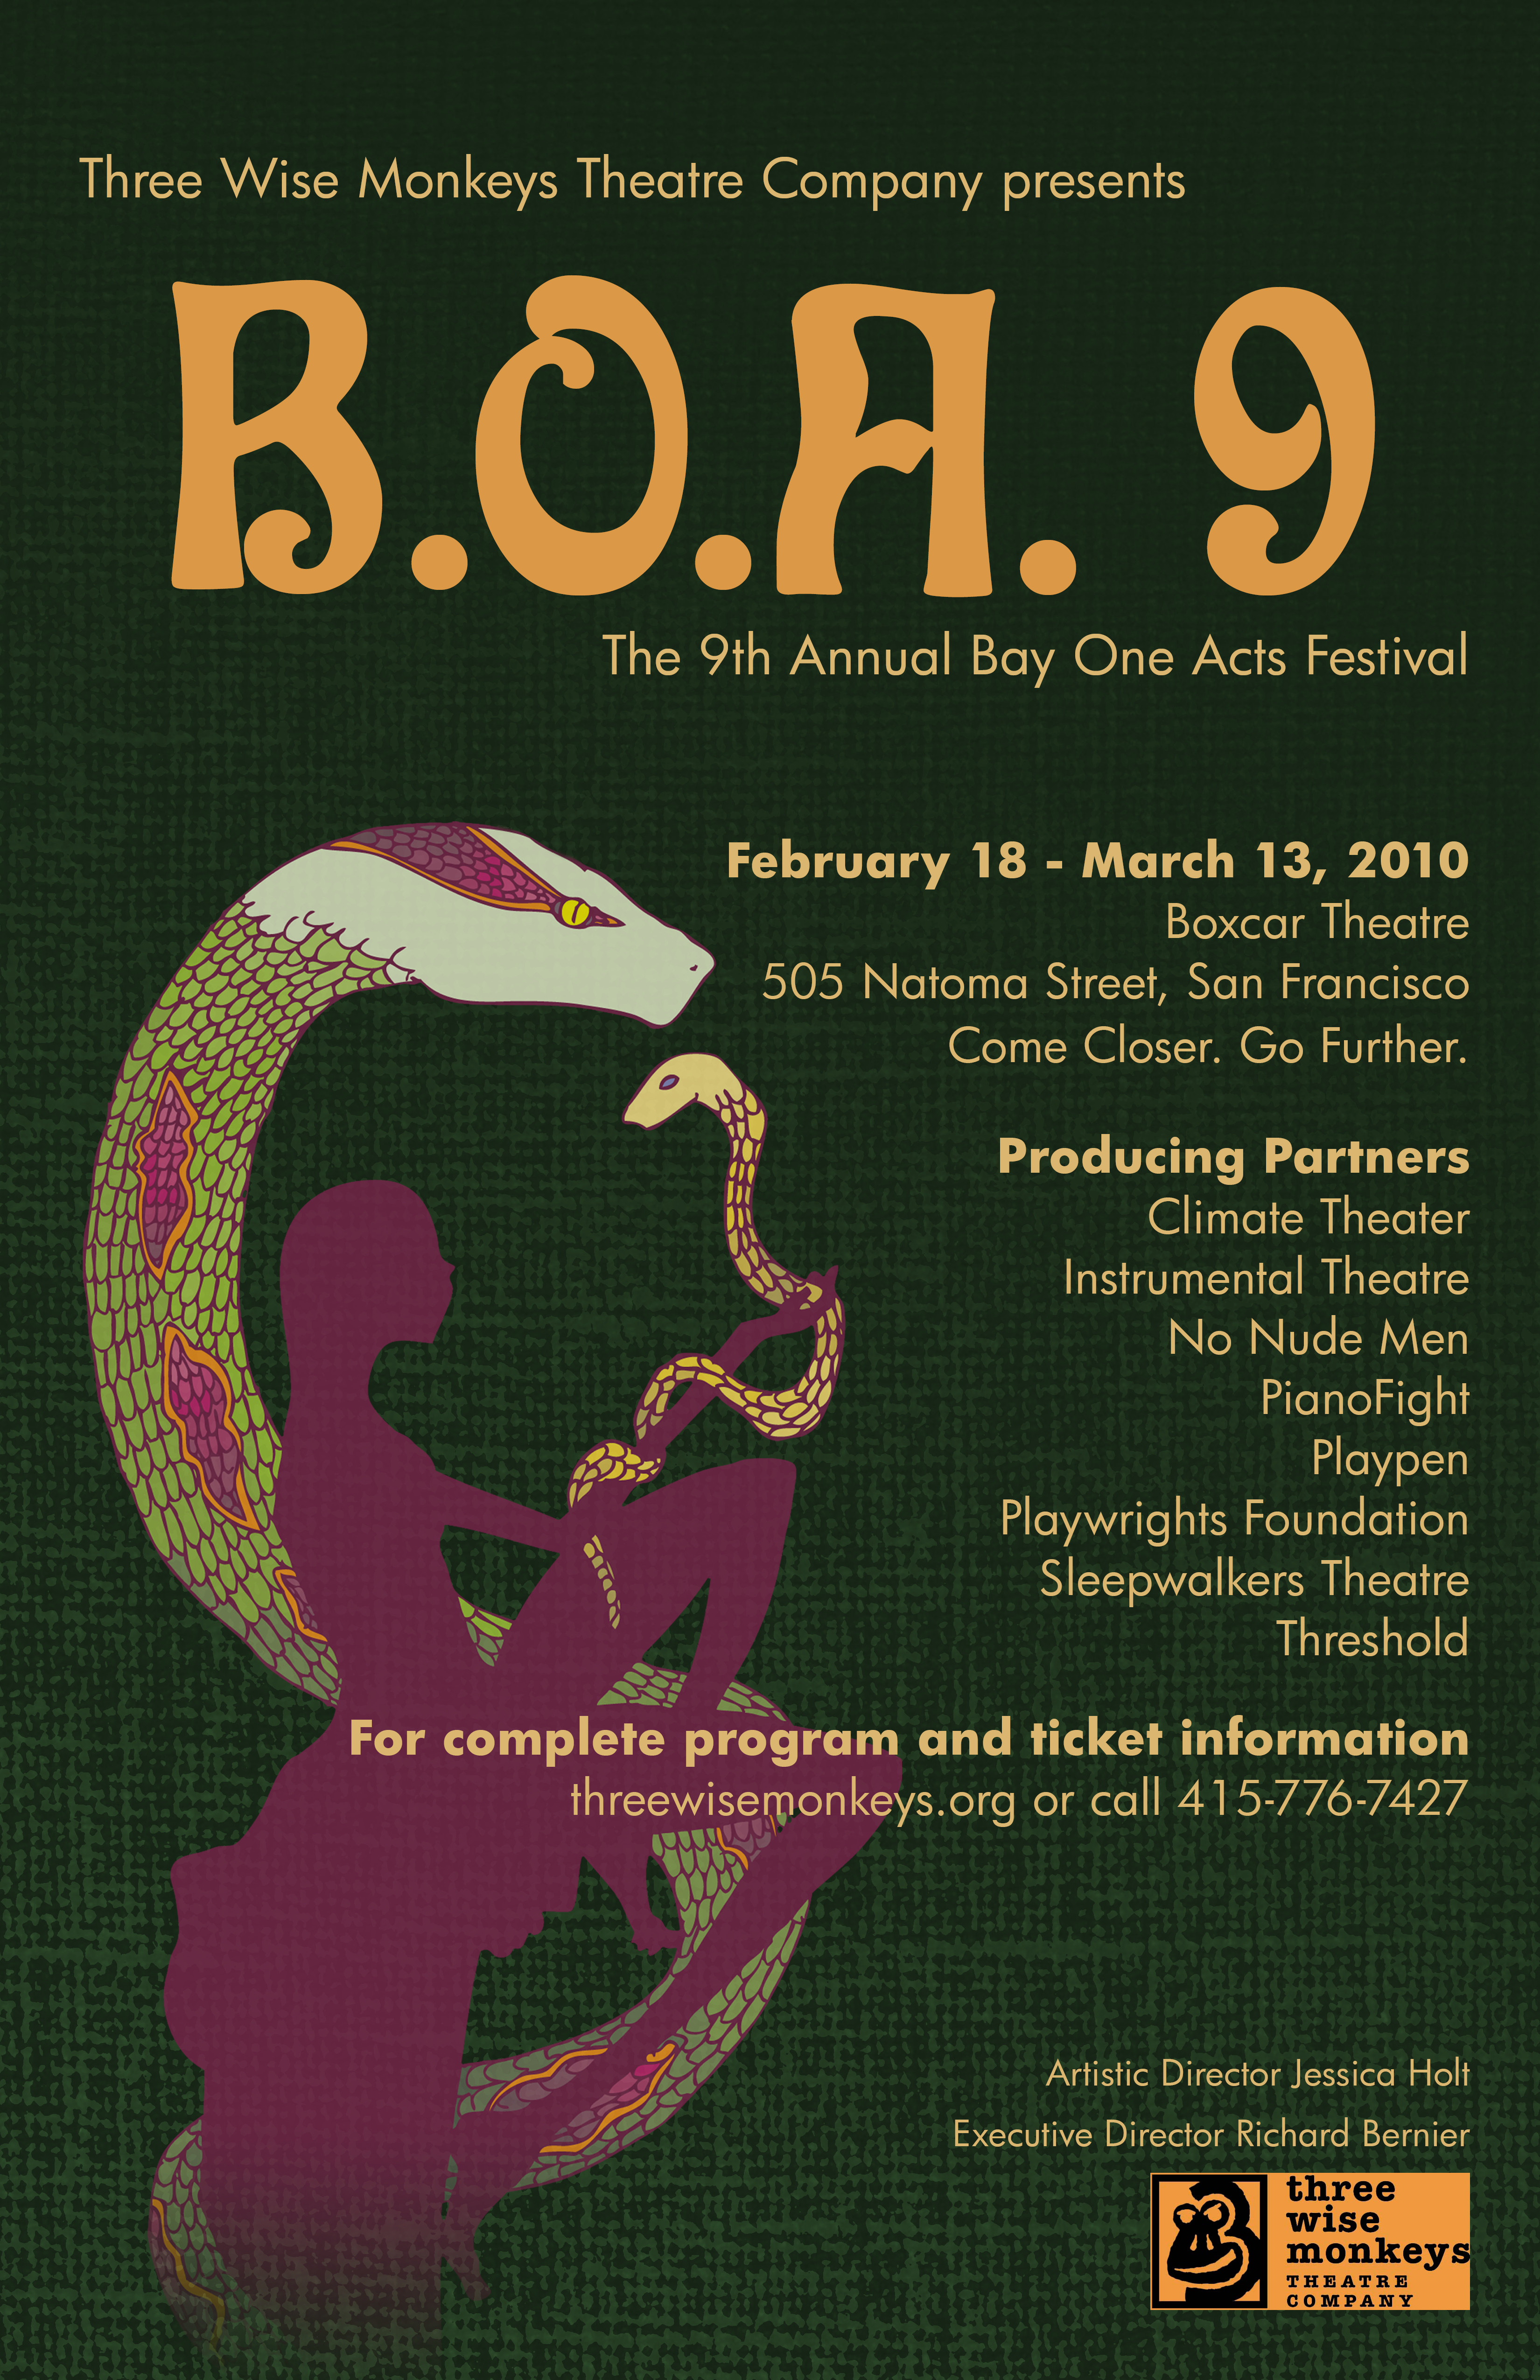 BOA 9, an anthology of plays in 2009 (one of my firsts!)